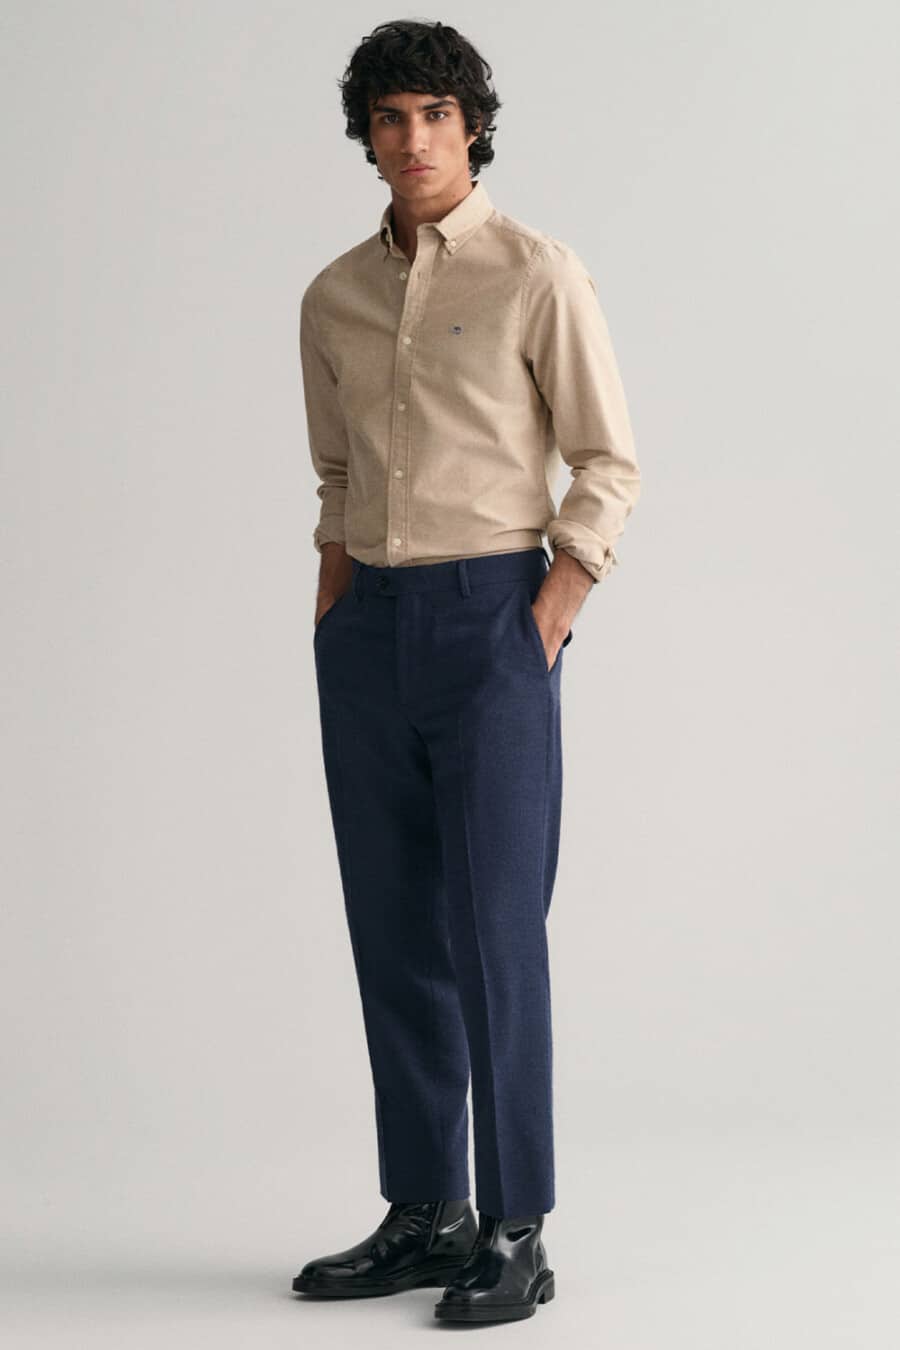 Men's navy tailored pants, tucked in light brown Oxford shirt and black leather Chelsea boots outfit